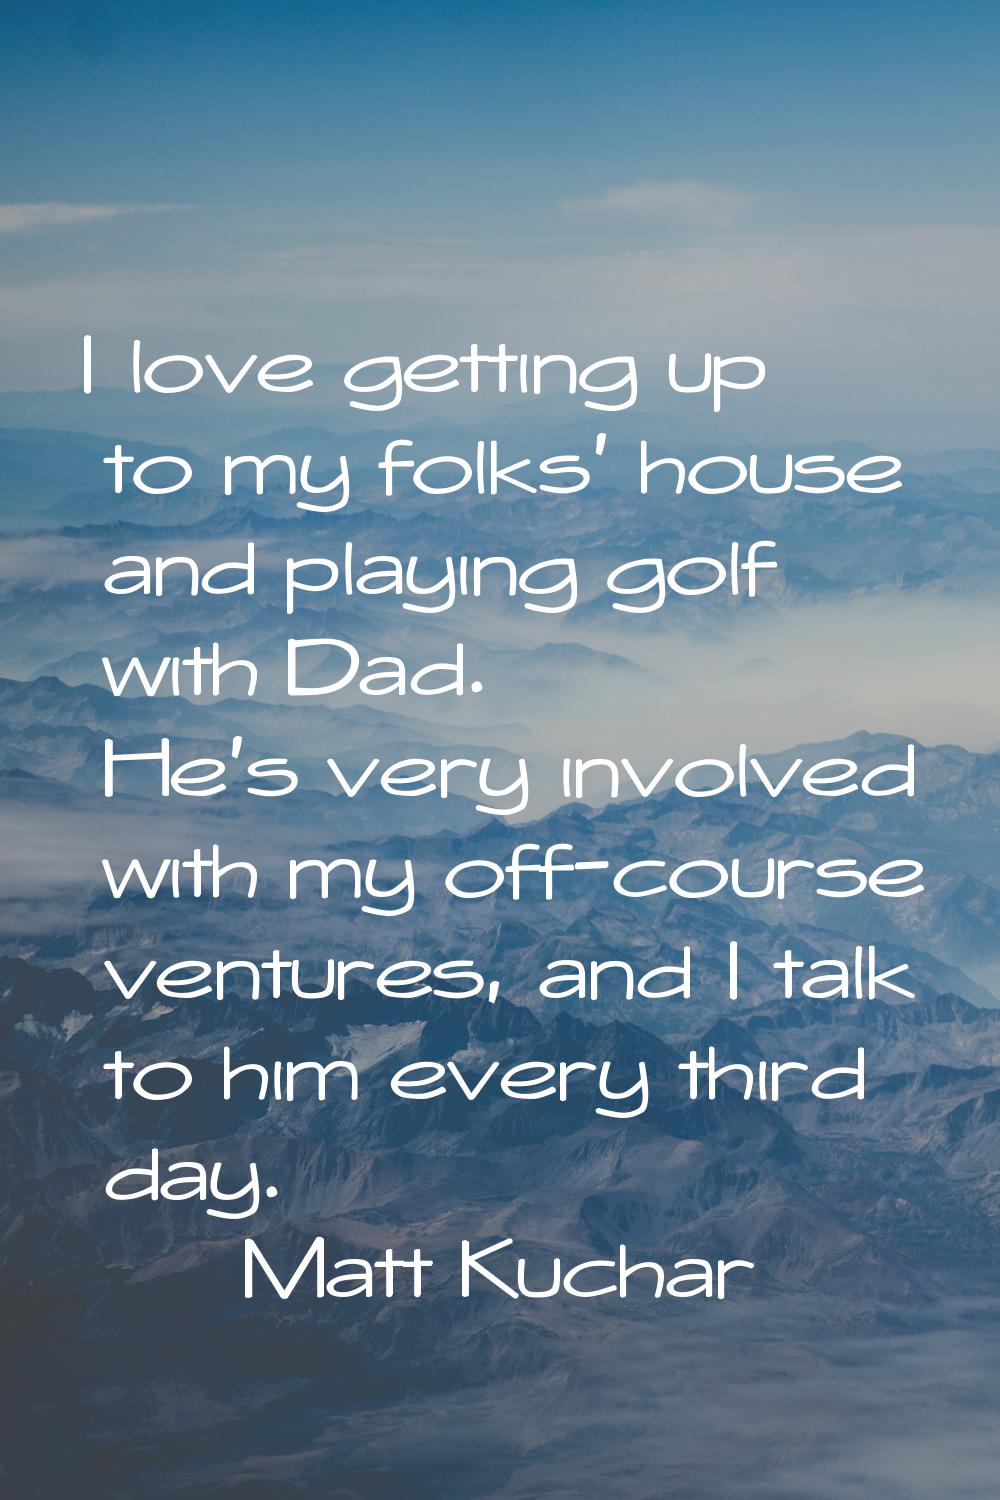 I love getting up to my folks' house and playing golf with Dad. He's very involved with my off-cour